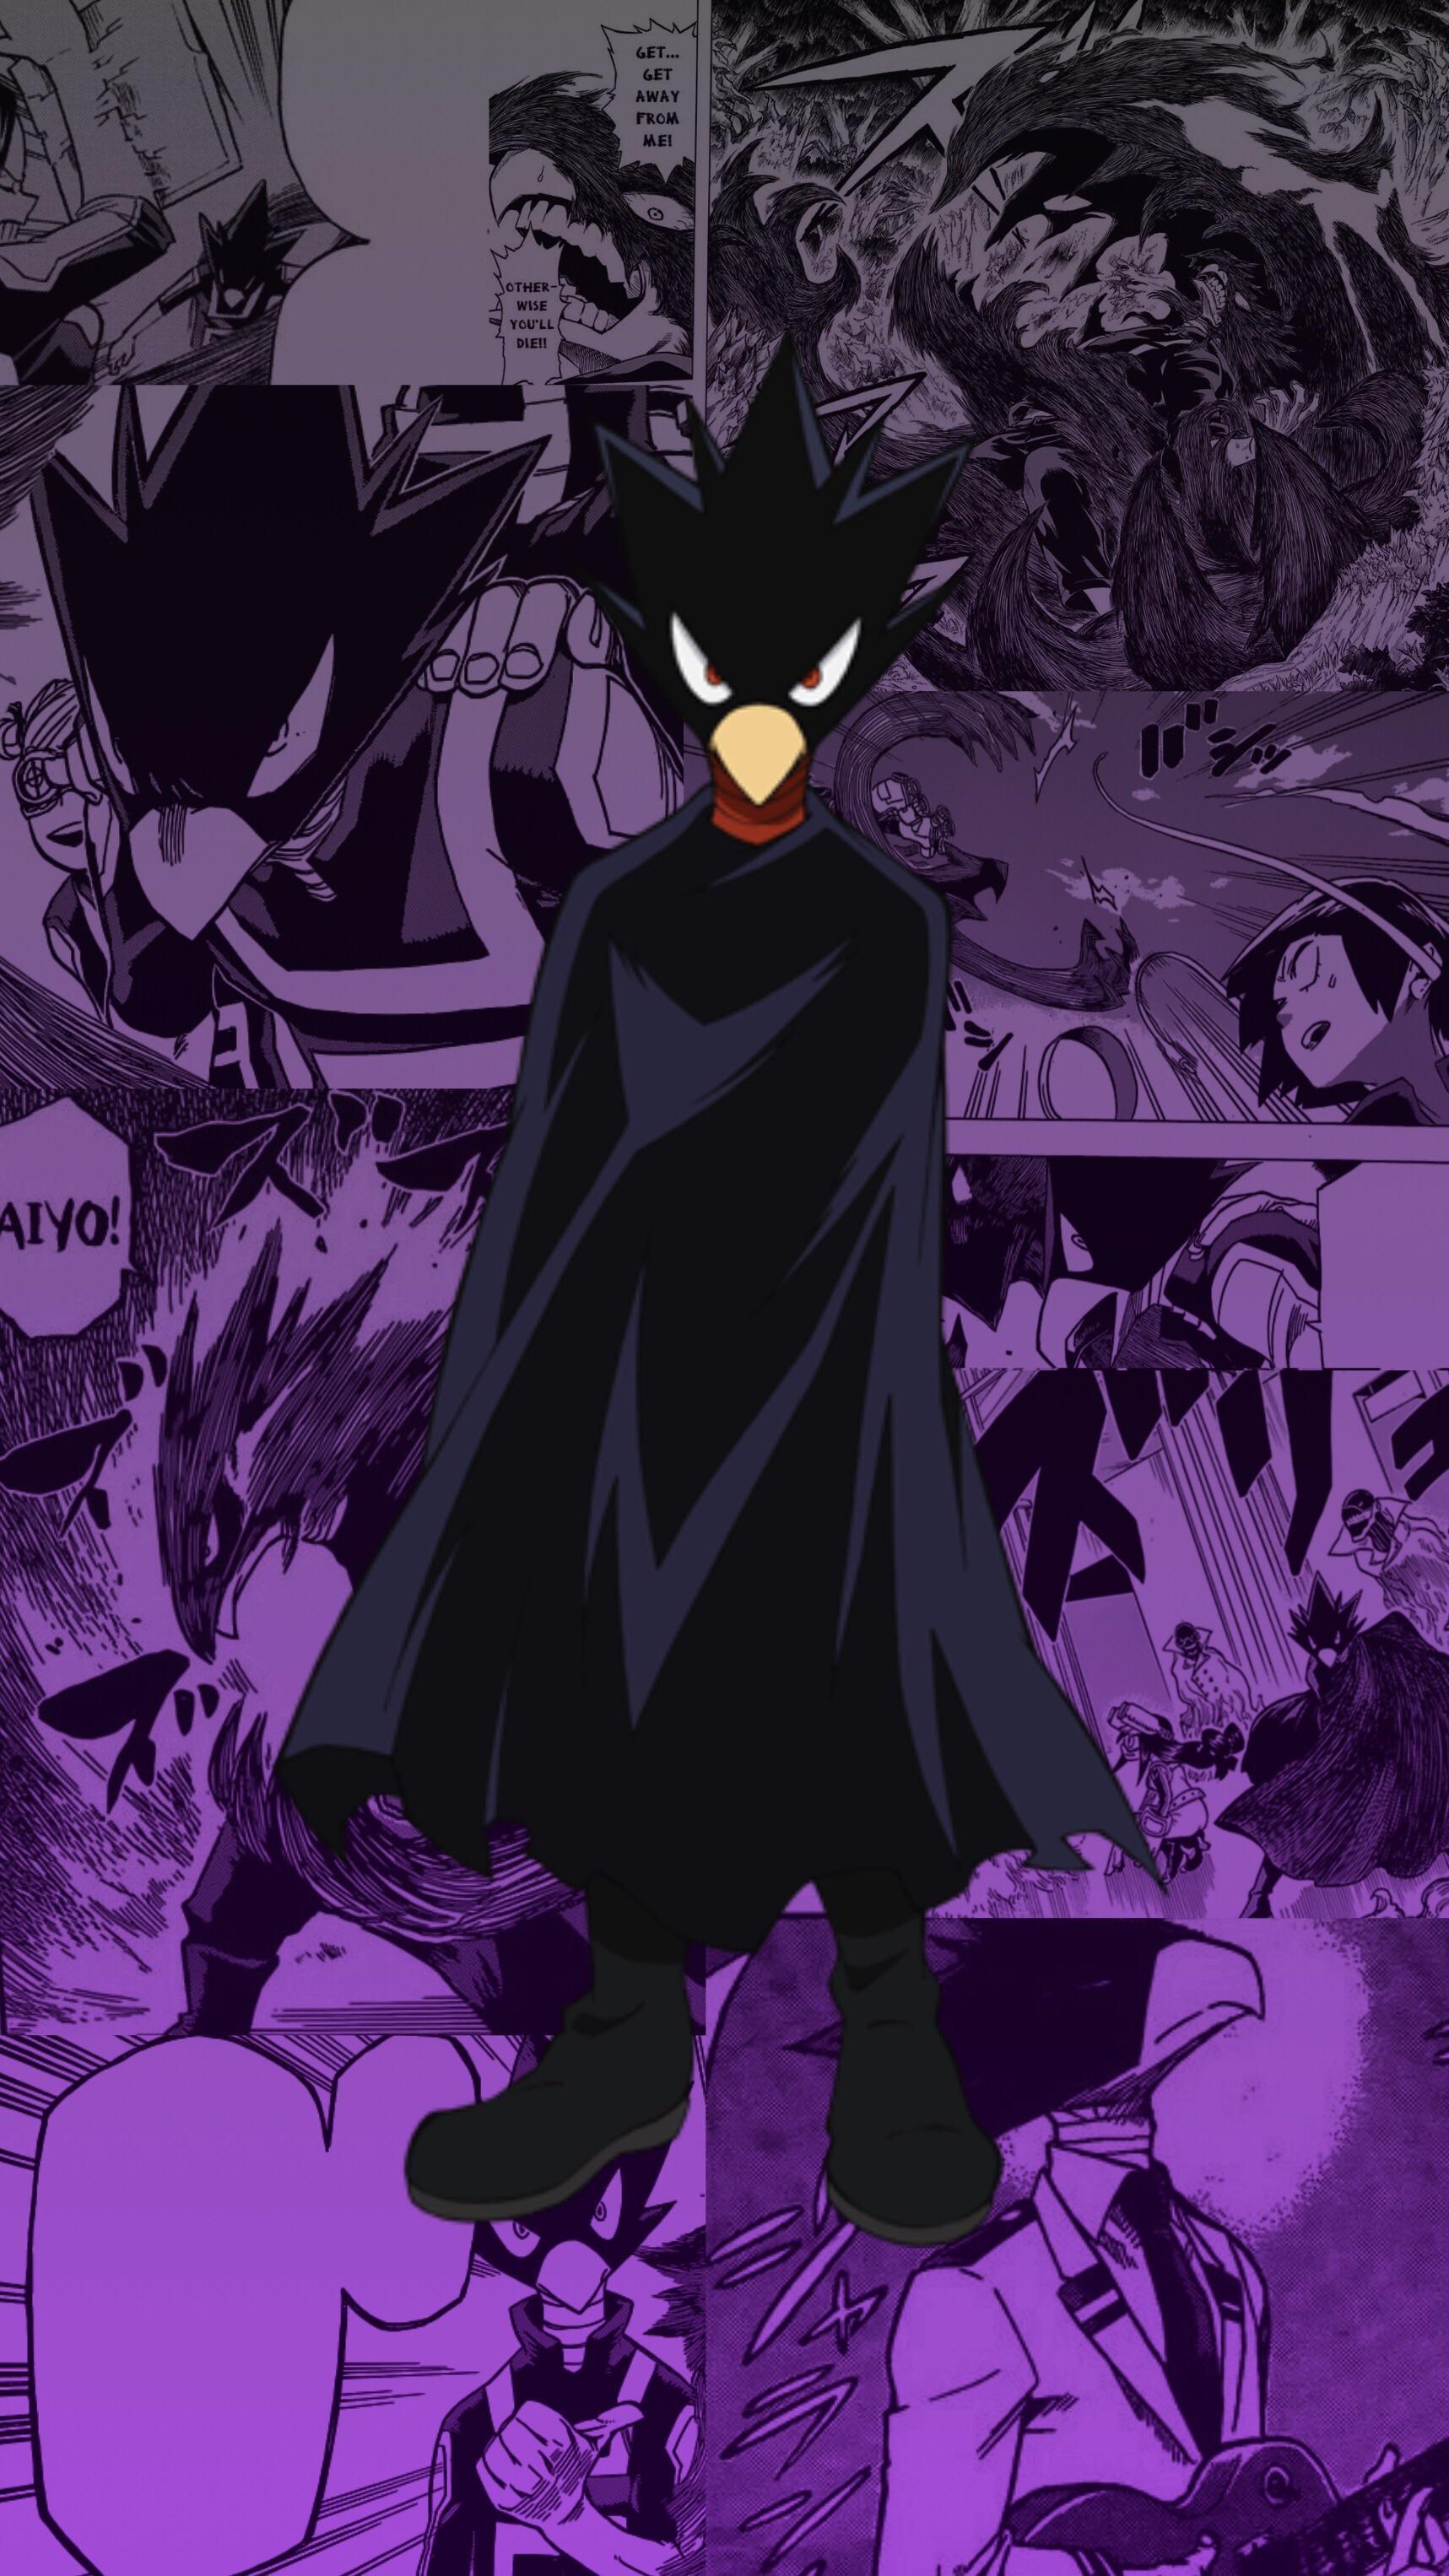 Tokoyami wallpaper! Now taking commissions for these